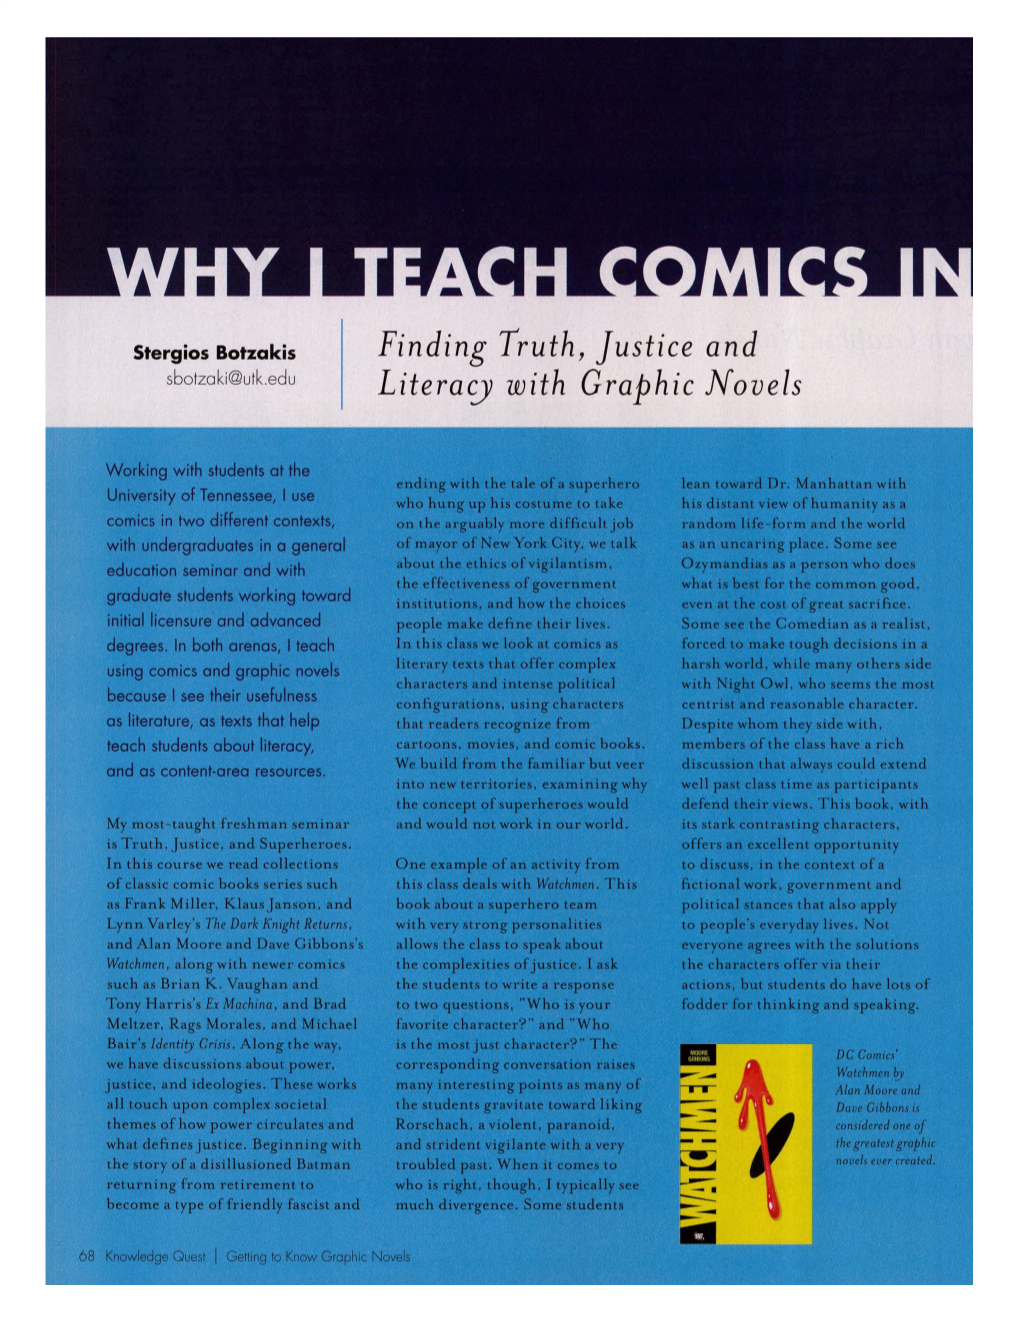 Finding Truth, Justice and Literacy with Graphic Novels